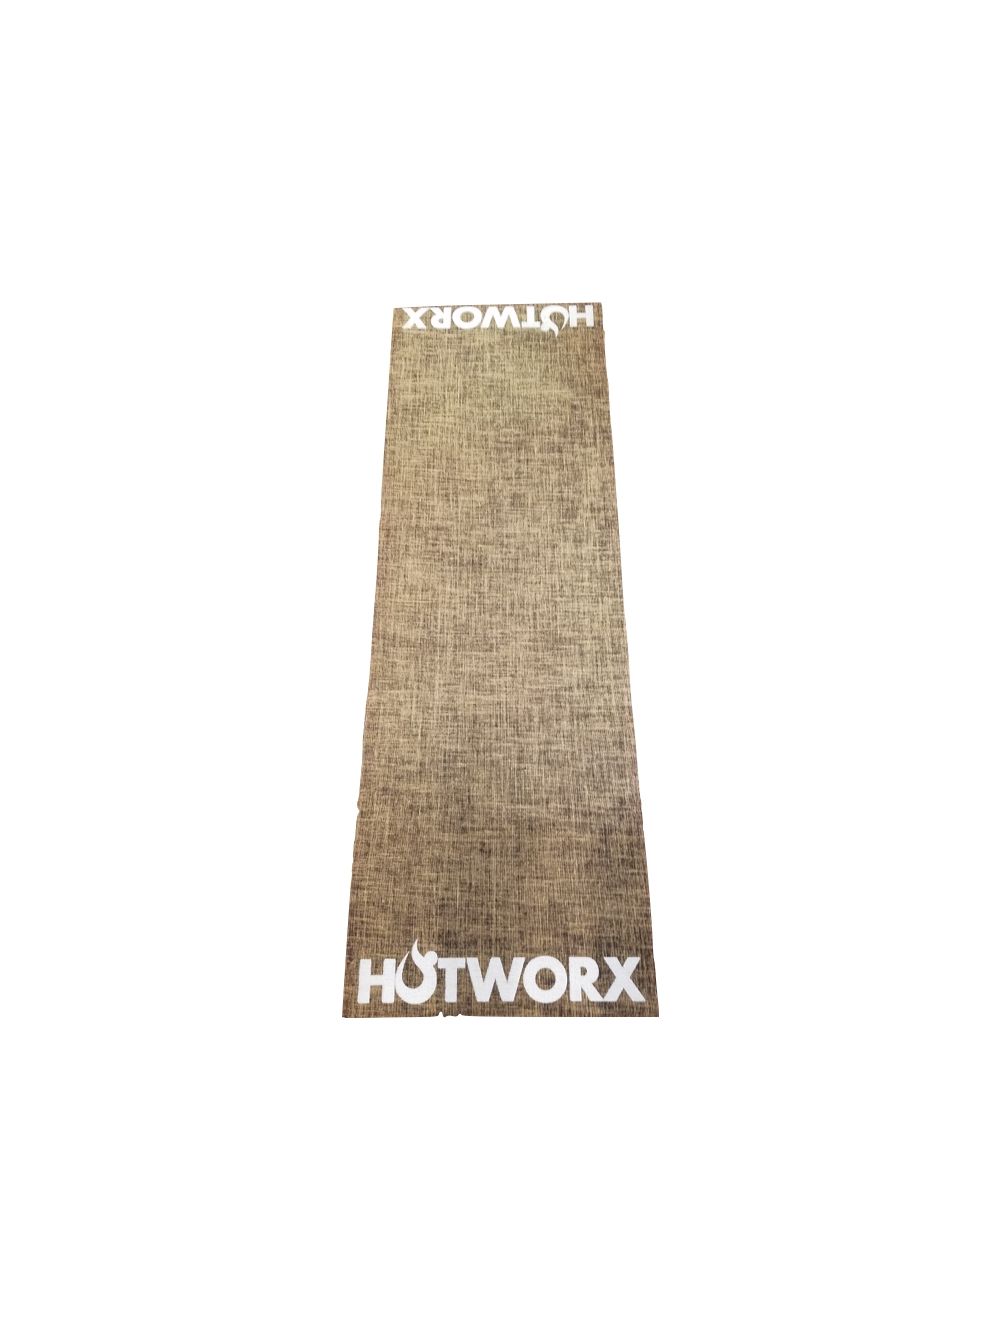 HOTWORX yoga mat & towel needed to workout in HOTWORX sauna